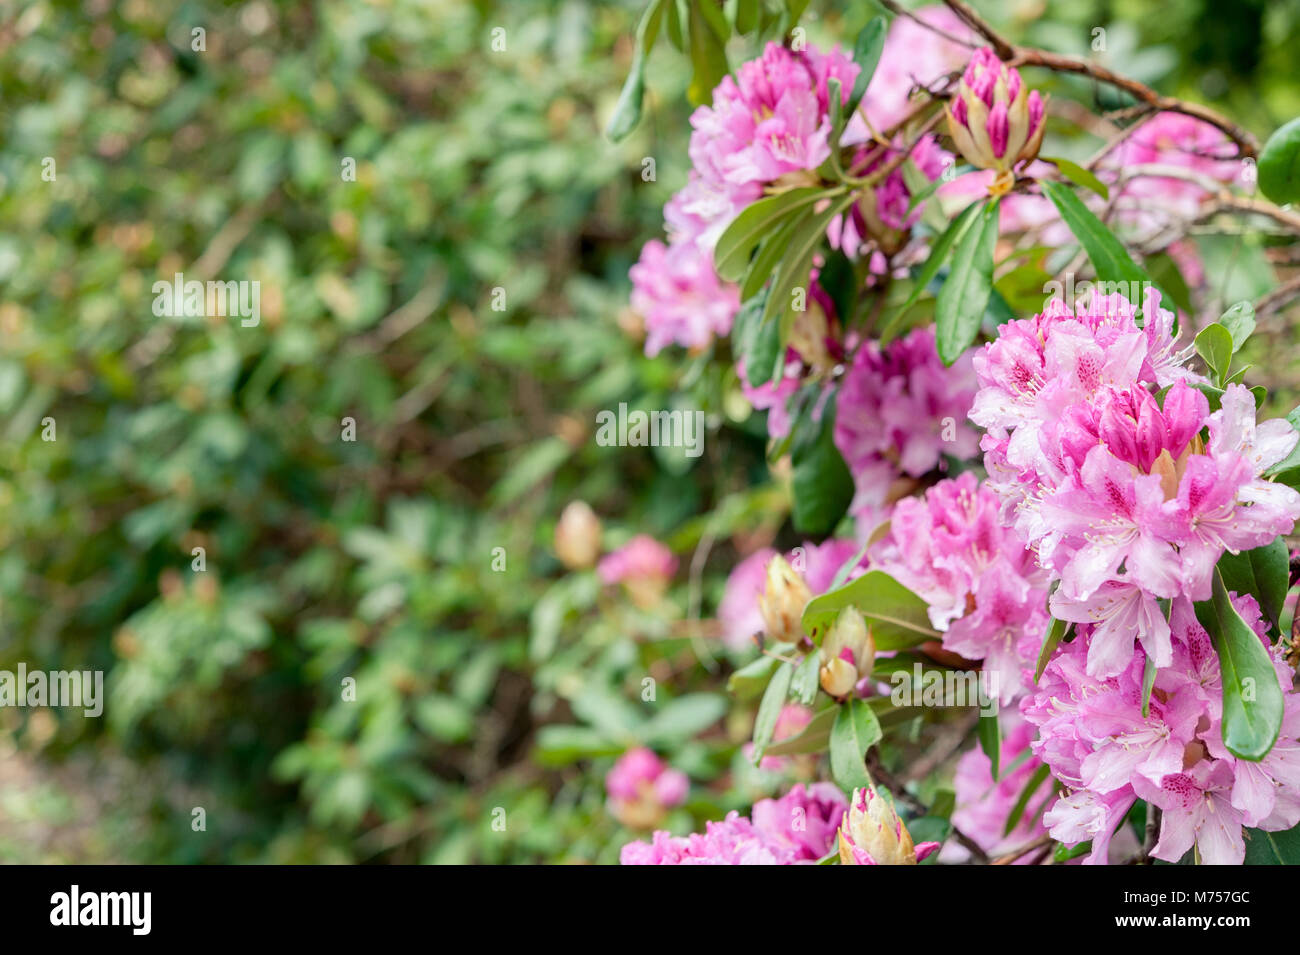 Pink rhododendron flowers blooming on rhododendron bush. Stock Photo